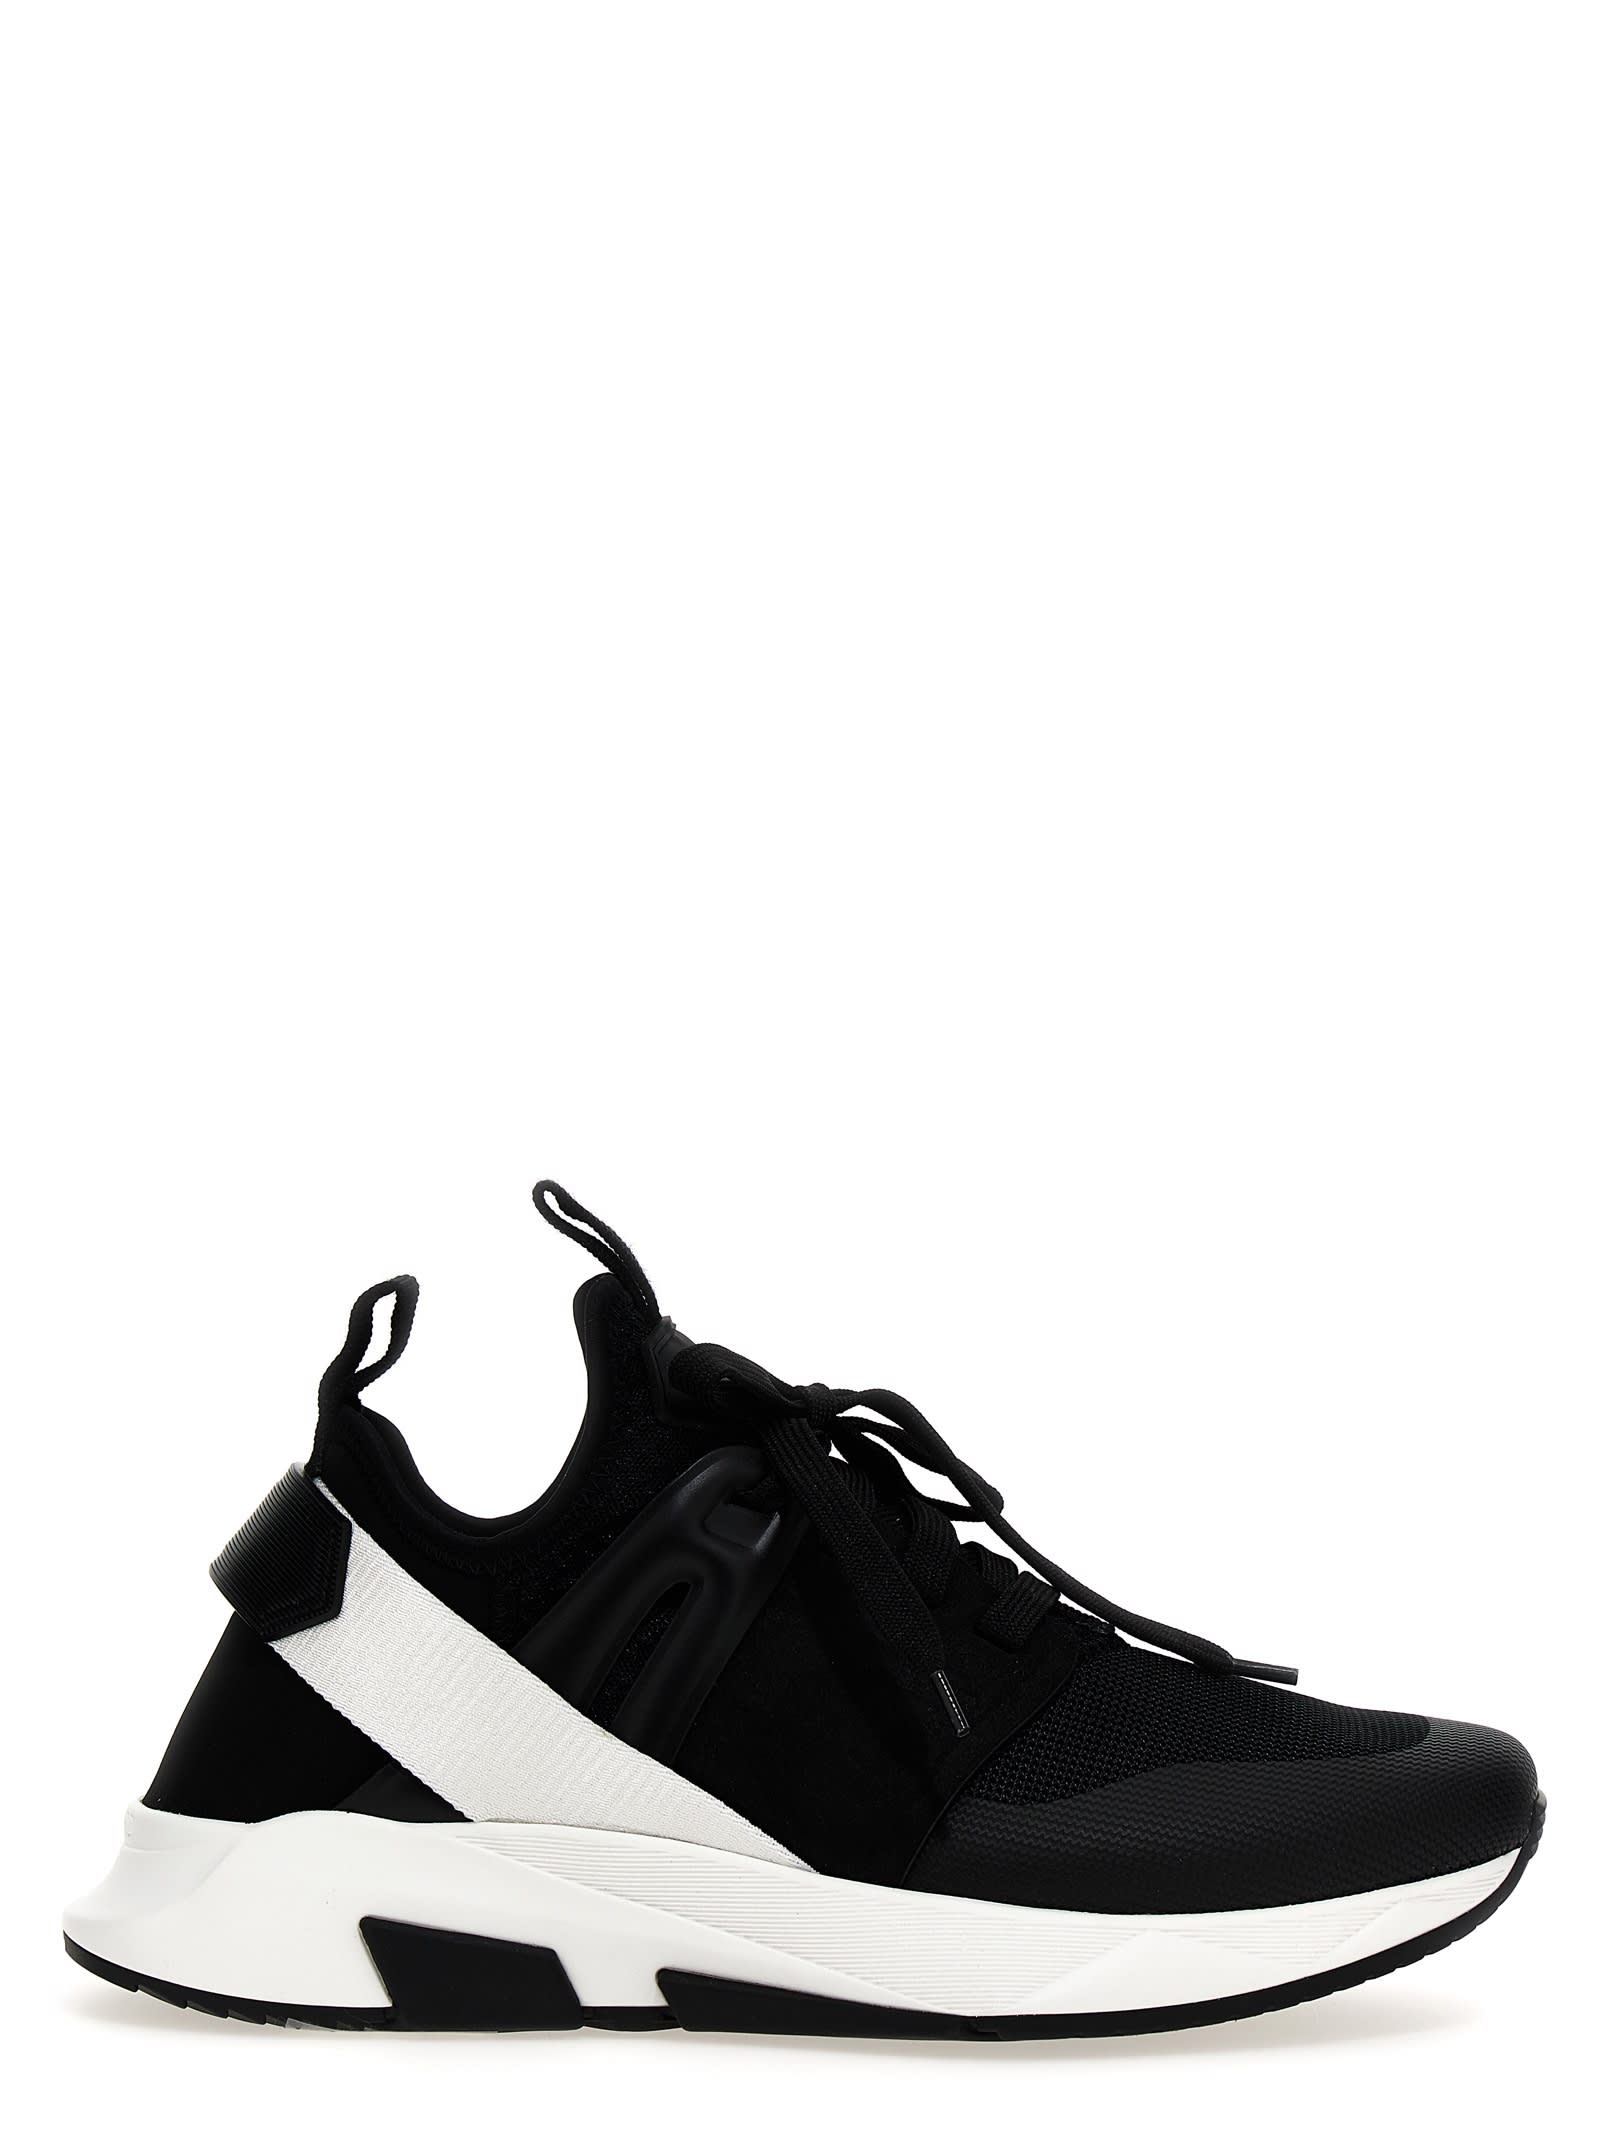 TOM FORD LOGO TECHNO SNEAKERS